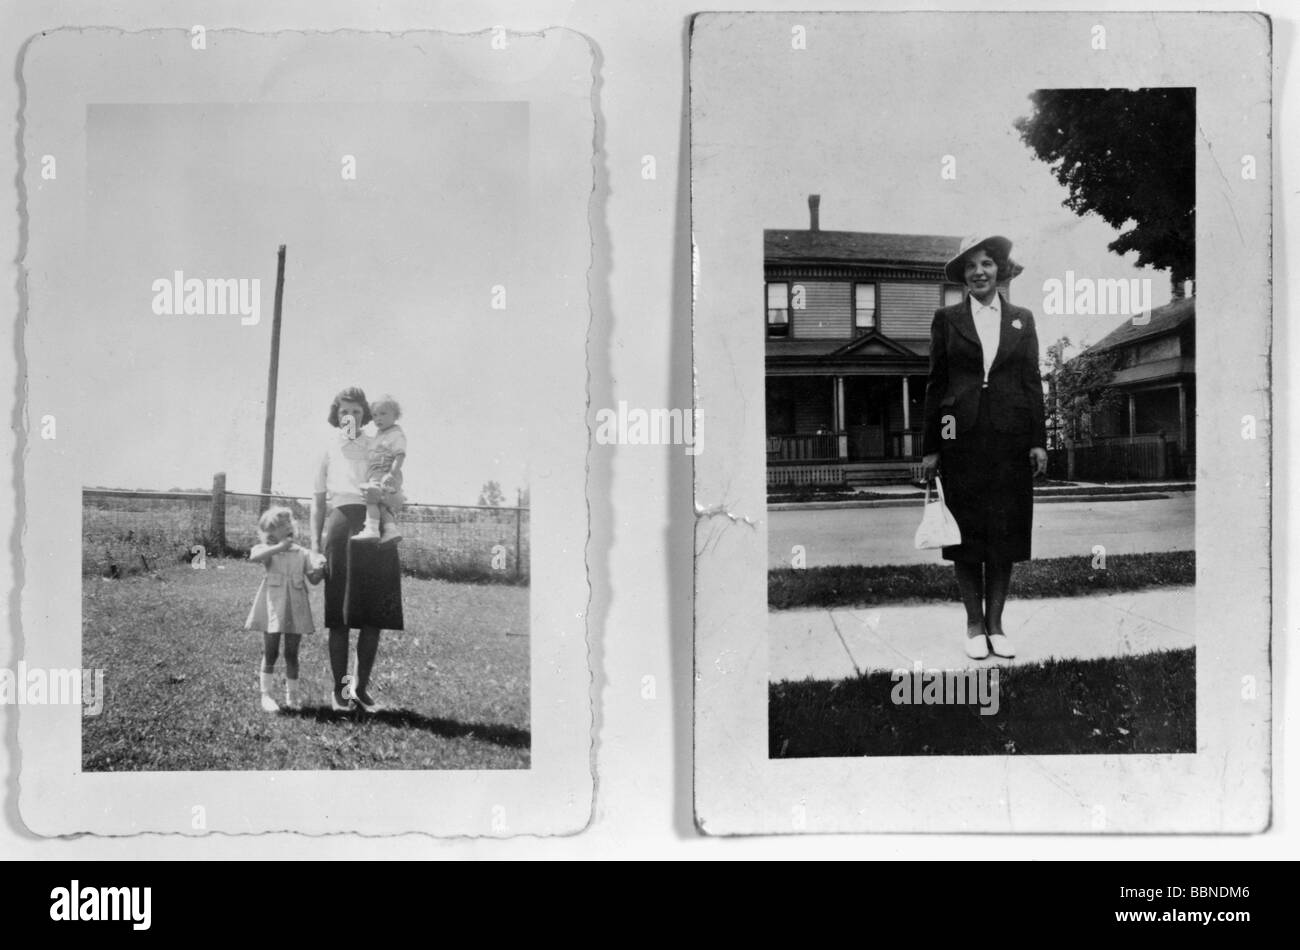 events, Second World War / WWII, France, Dieppe, 19.8.1942, pictures from the wallet of a fallen Canadian soldier, wife, children, Stock Photo